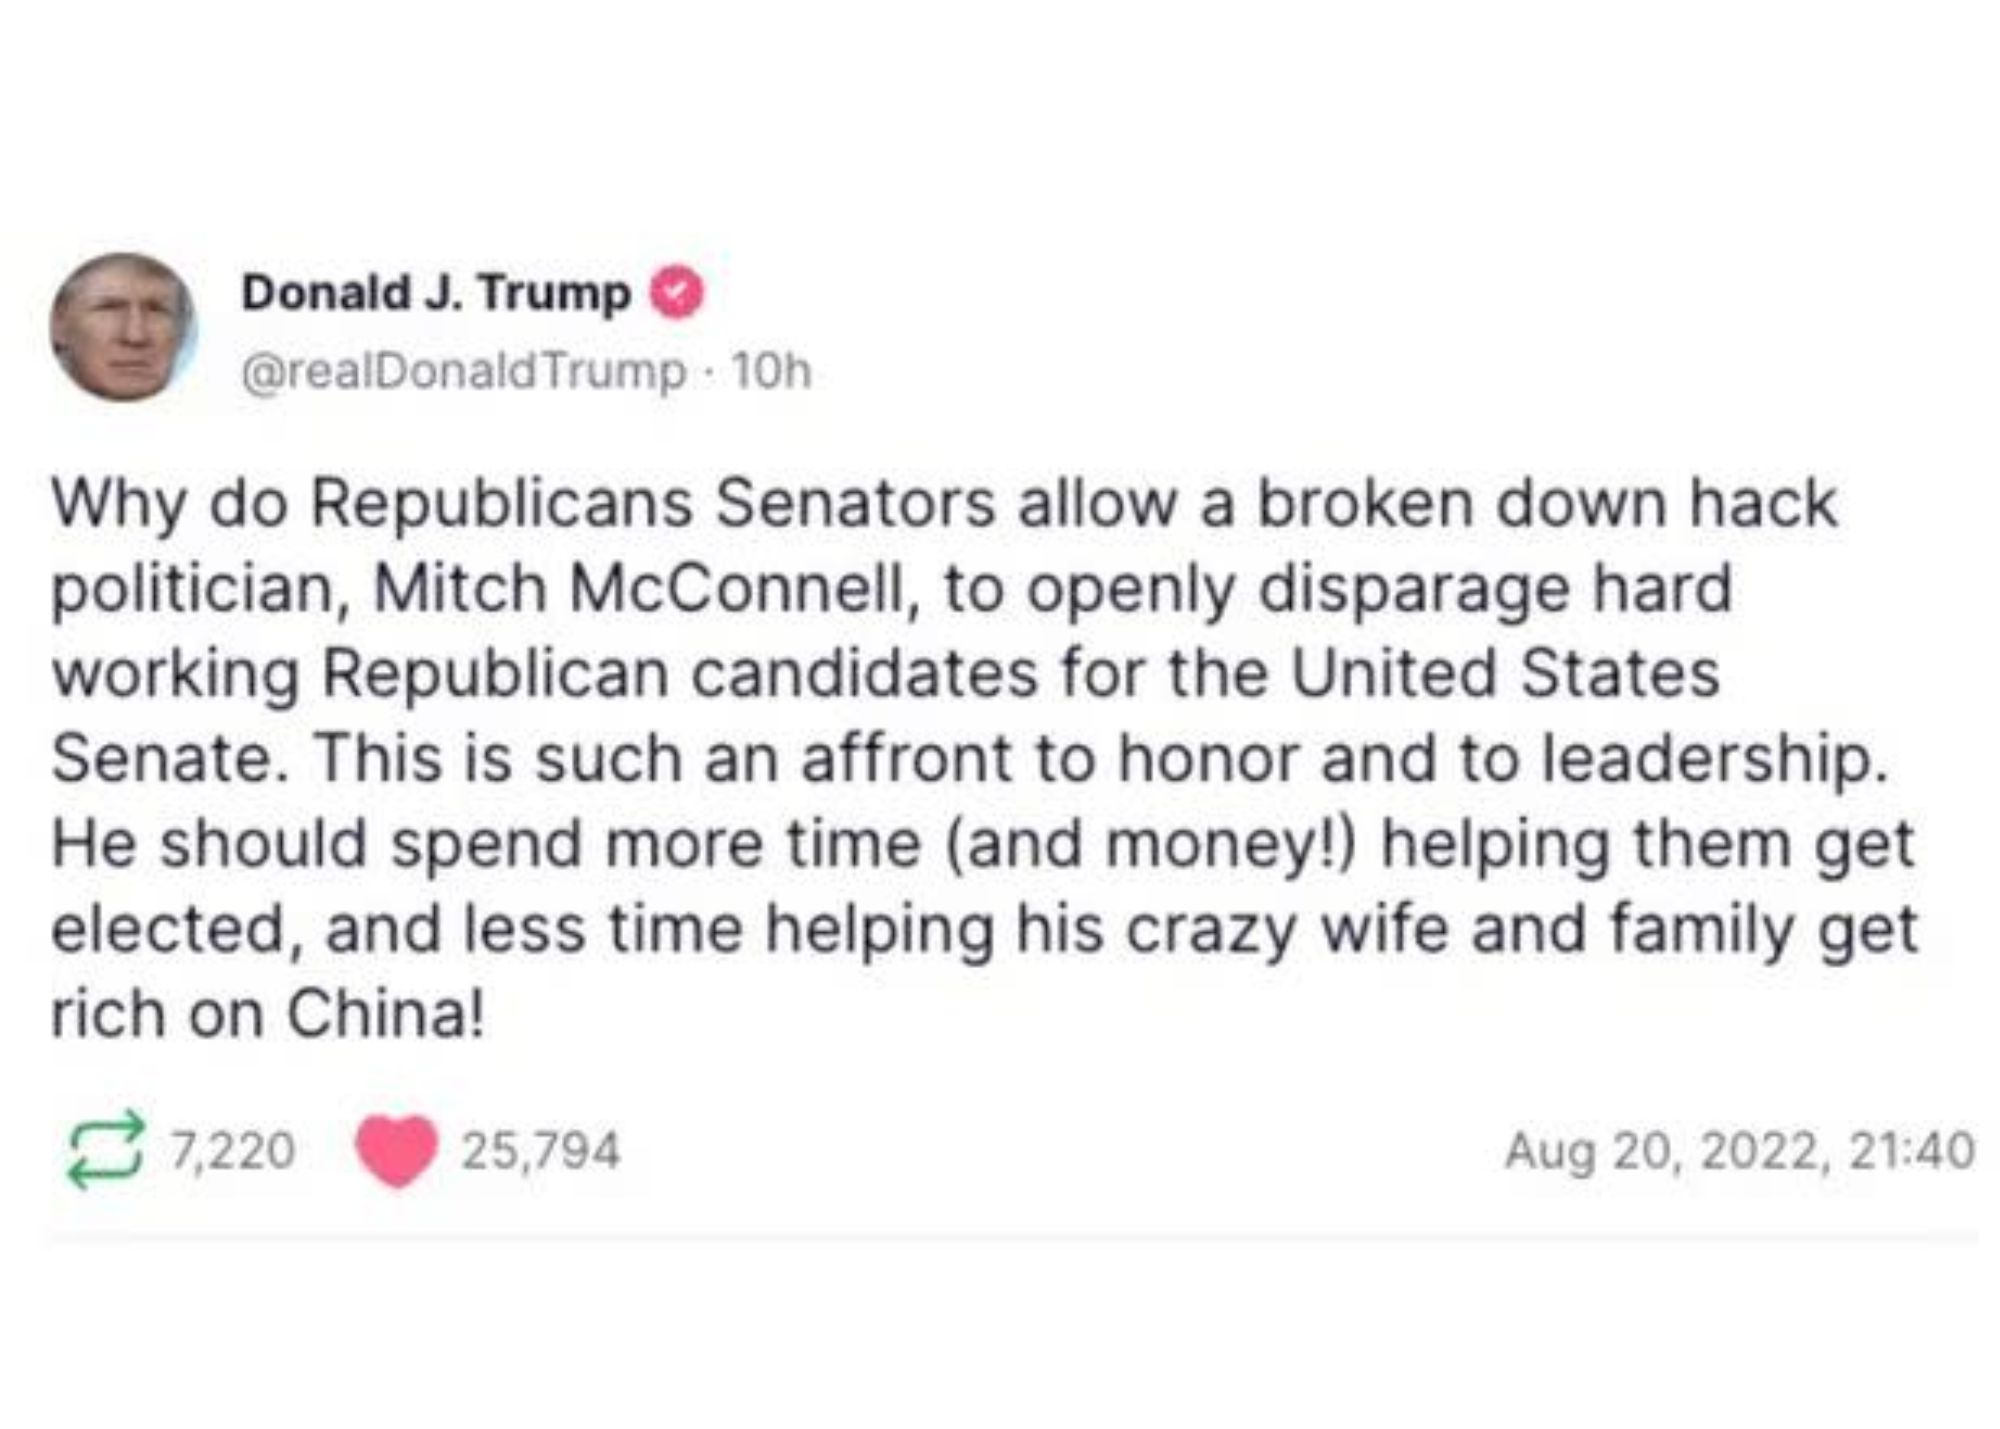 A screenshot of Donald Trump Post on Truth Social with 25,794 hearts